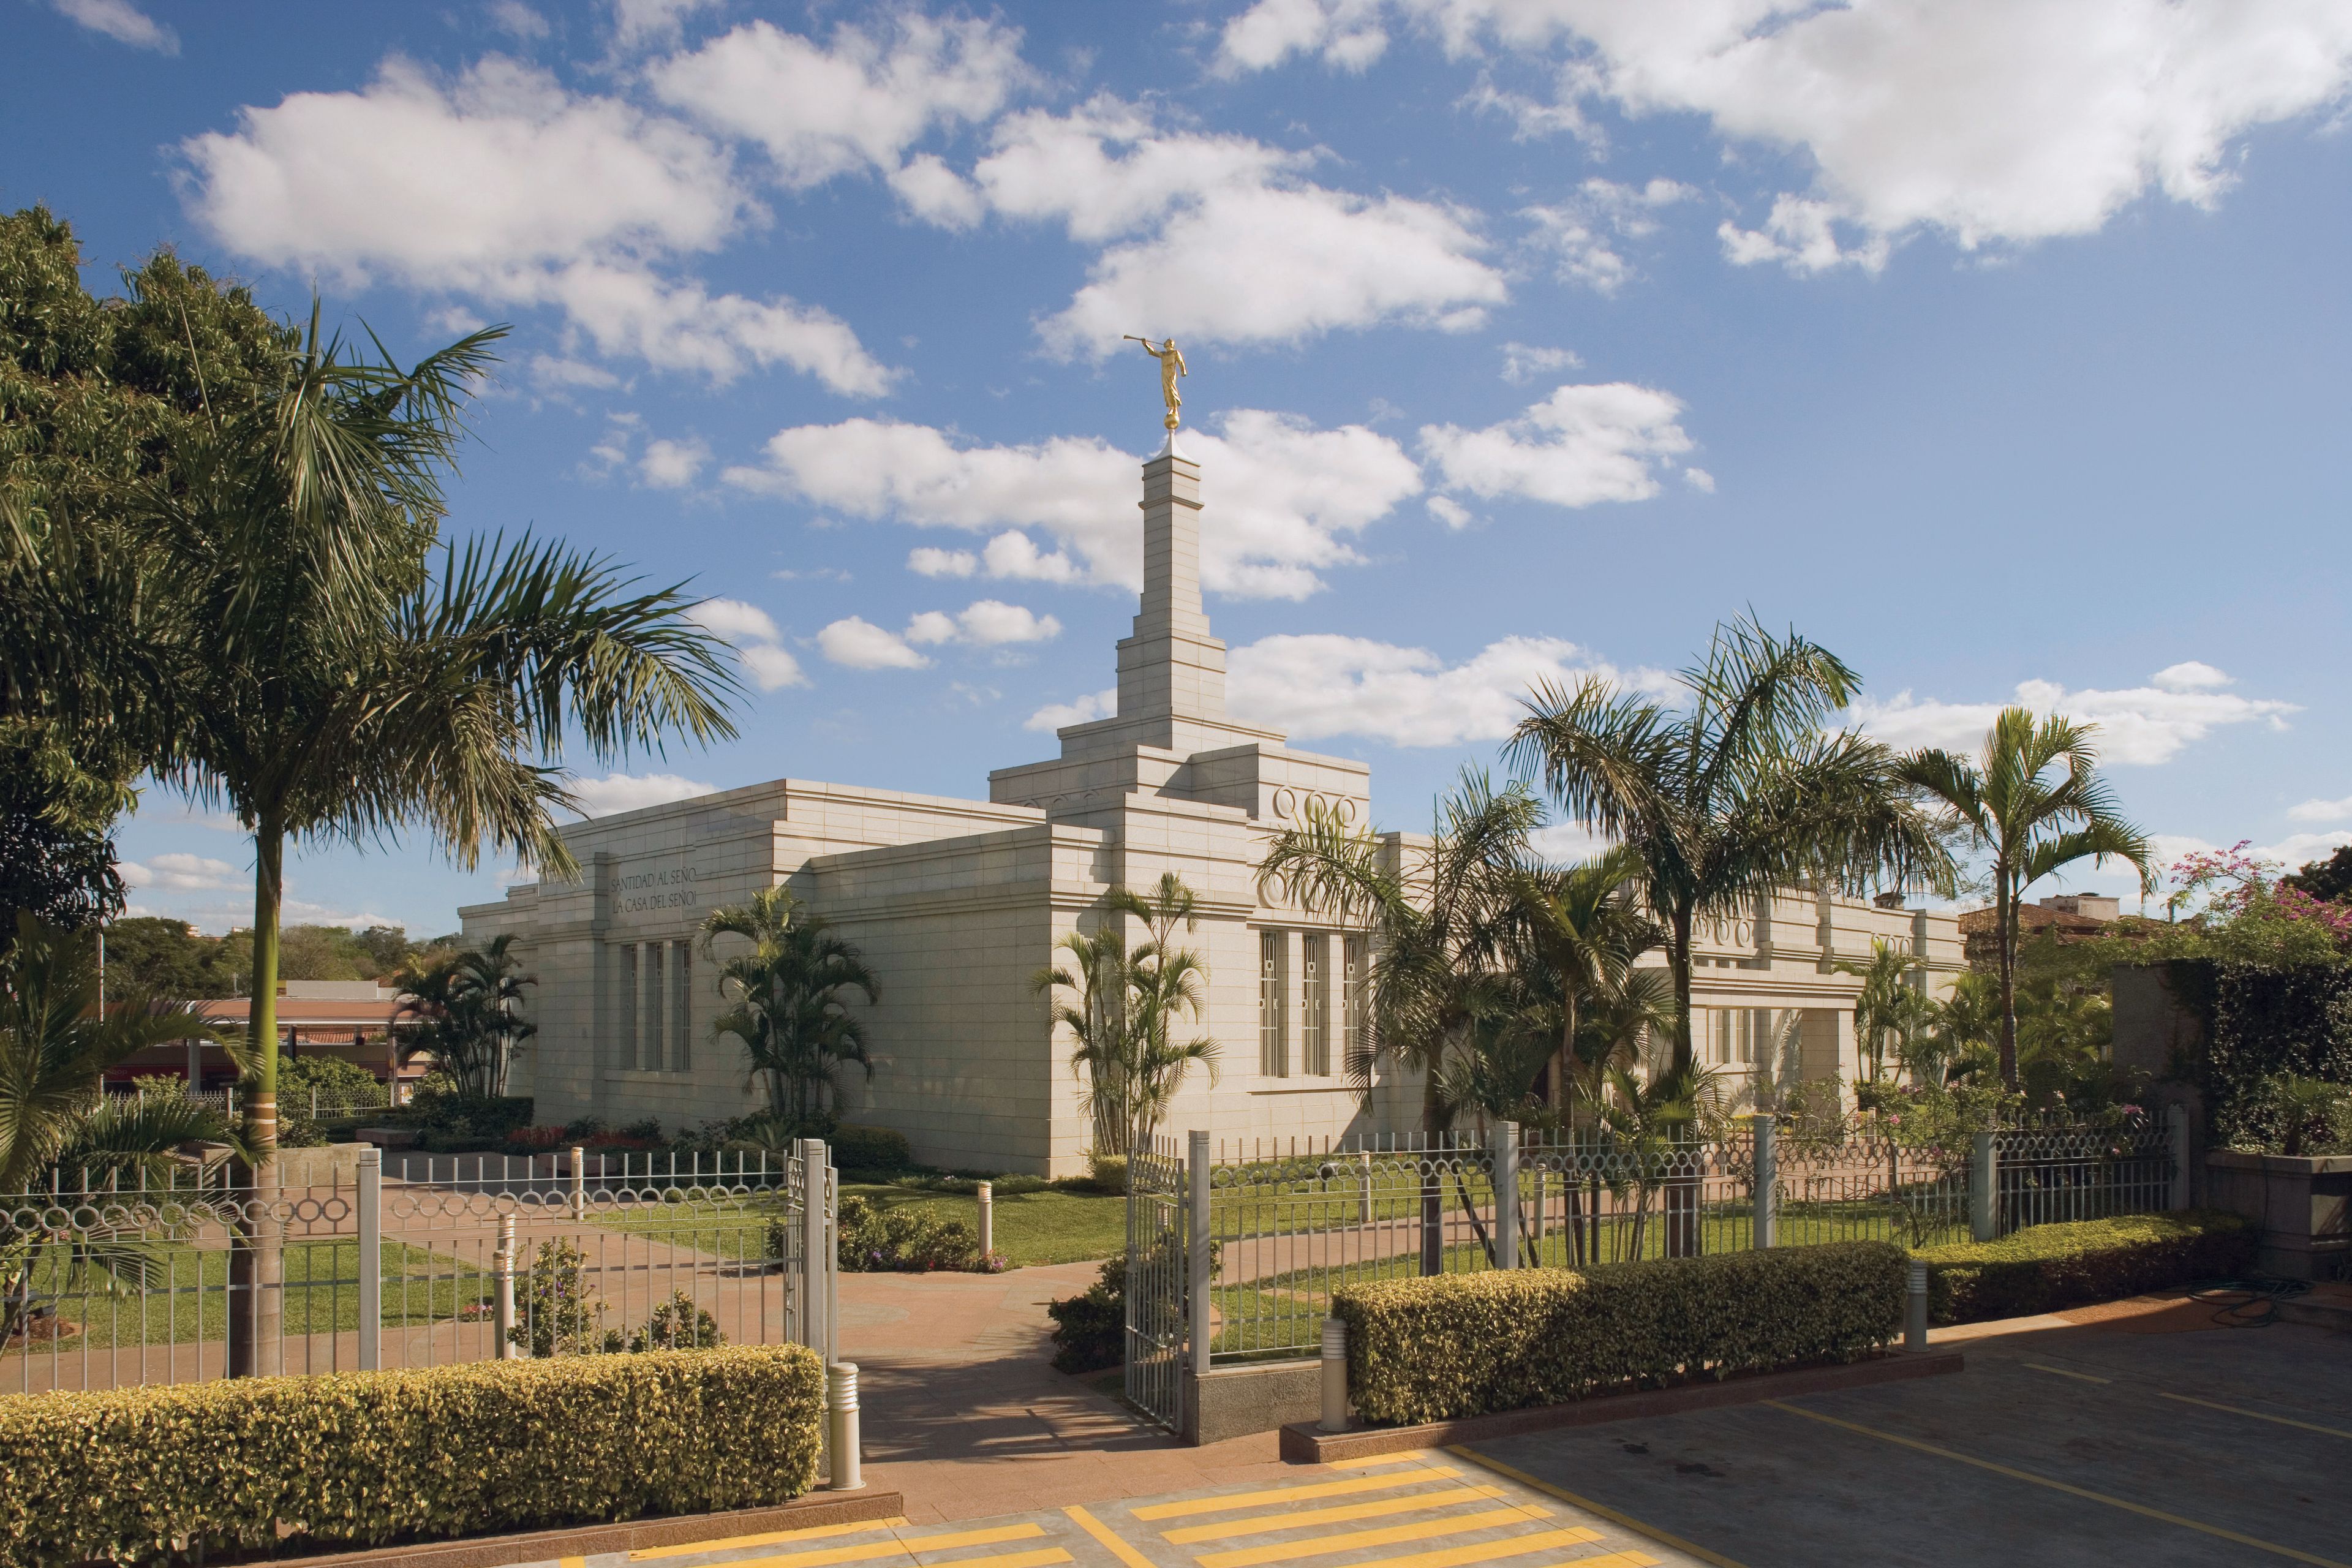 A view of the Asunción Paraguay Temple and grounds during the day.